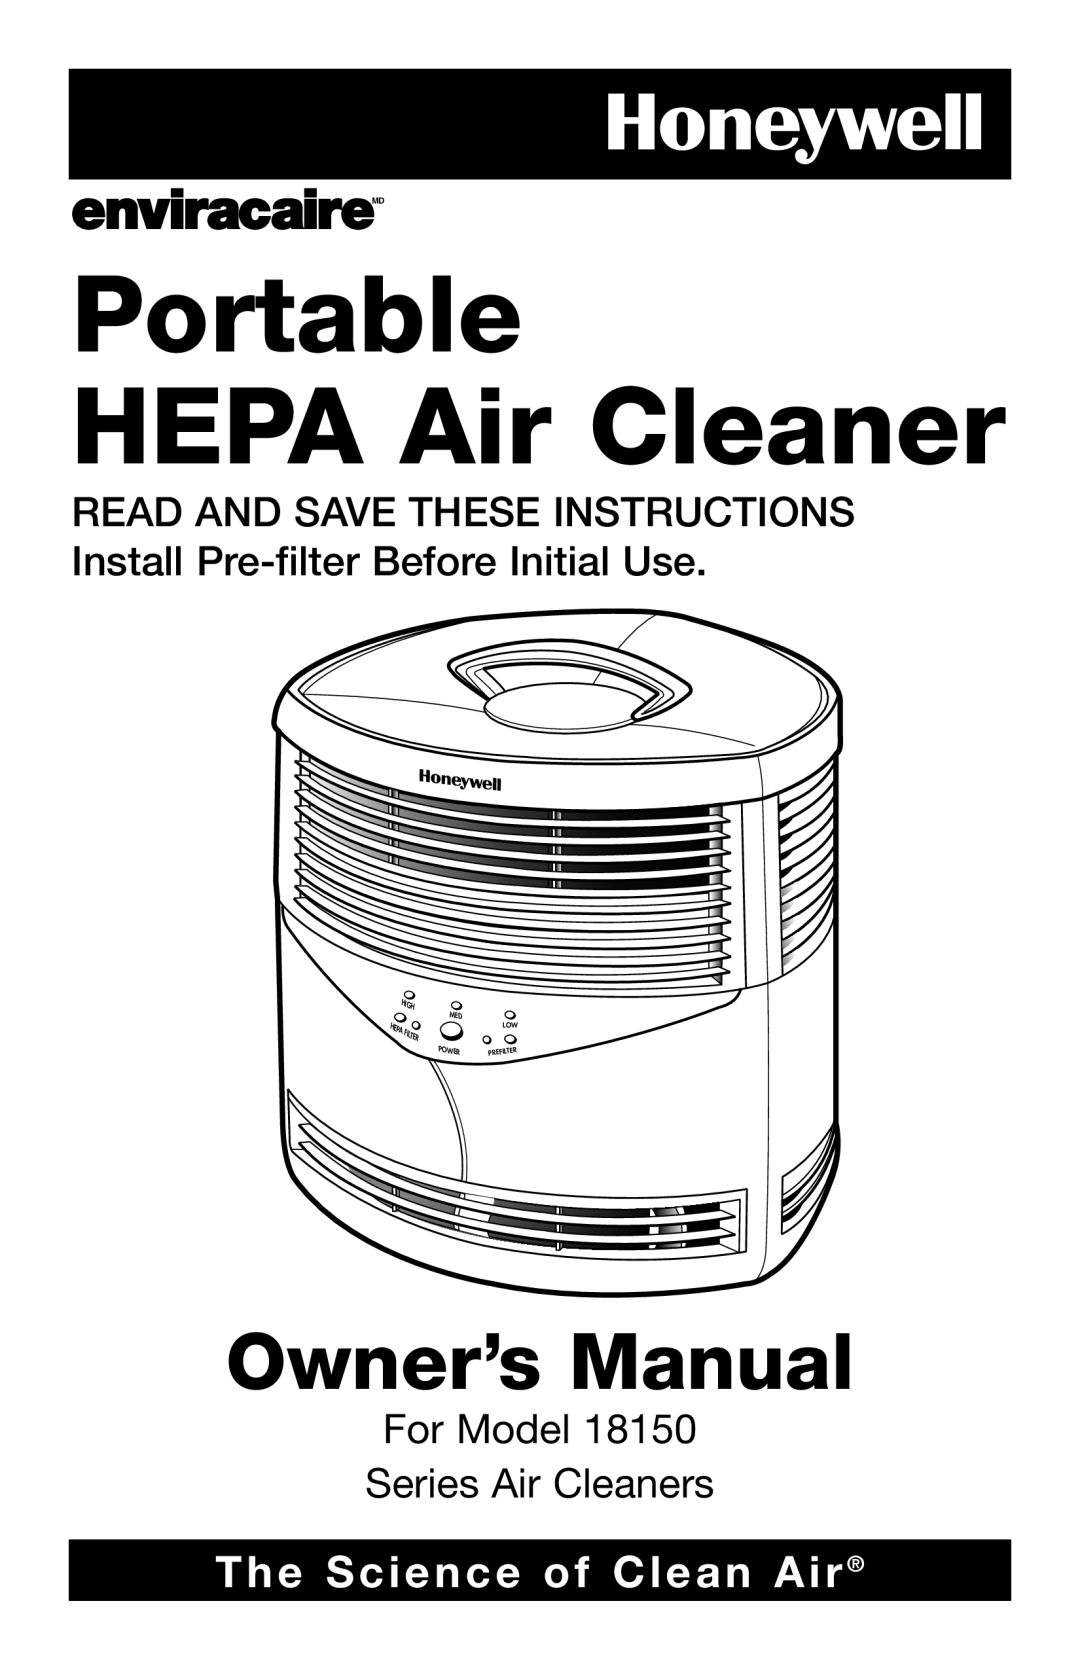 Honeywell 18150 Series owner manual Portable HEPA Air Cleaner, The Science of Clean Air, For Model Series Air Cleaners 